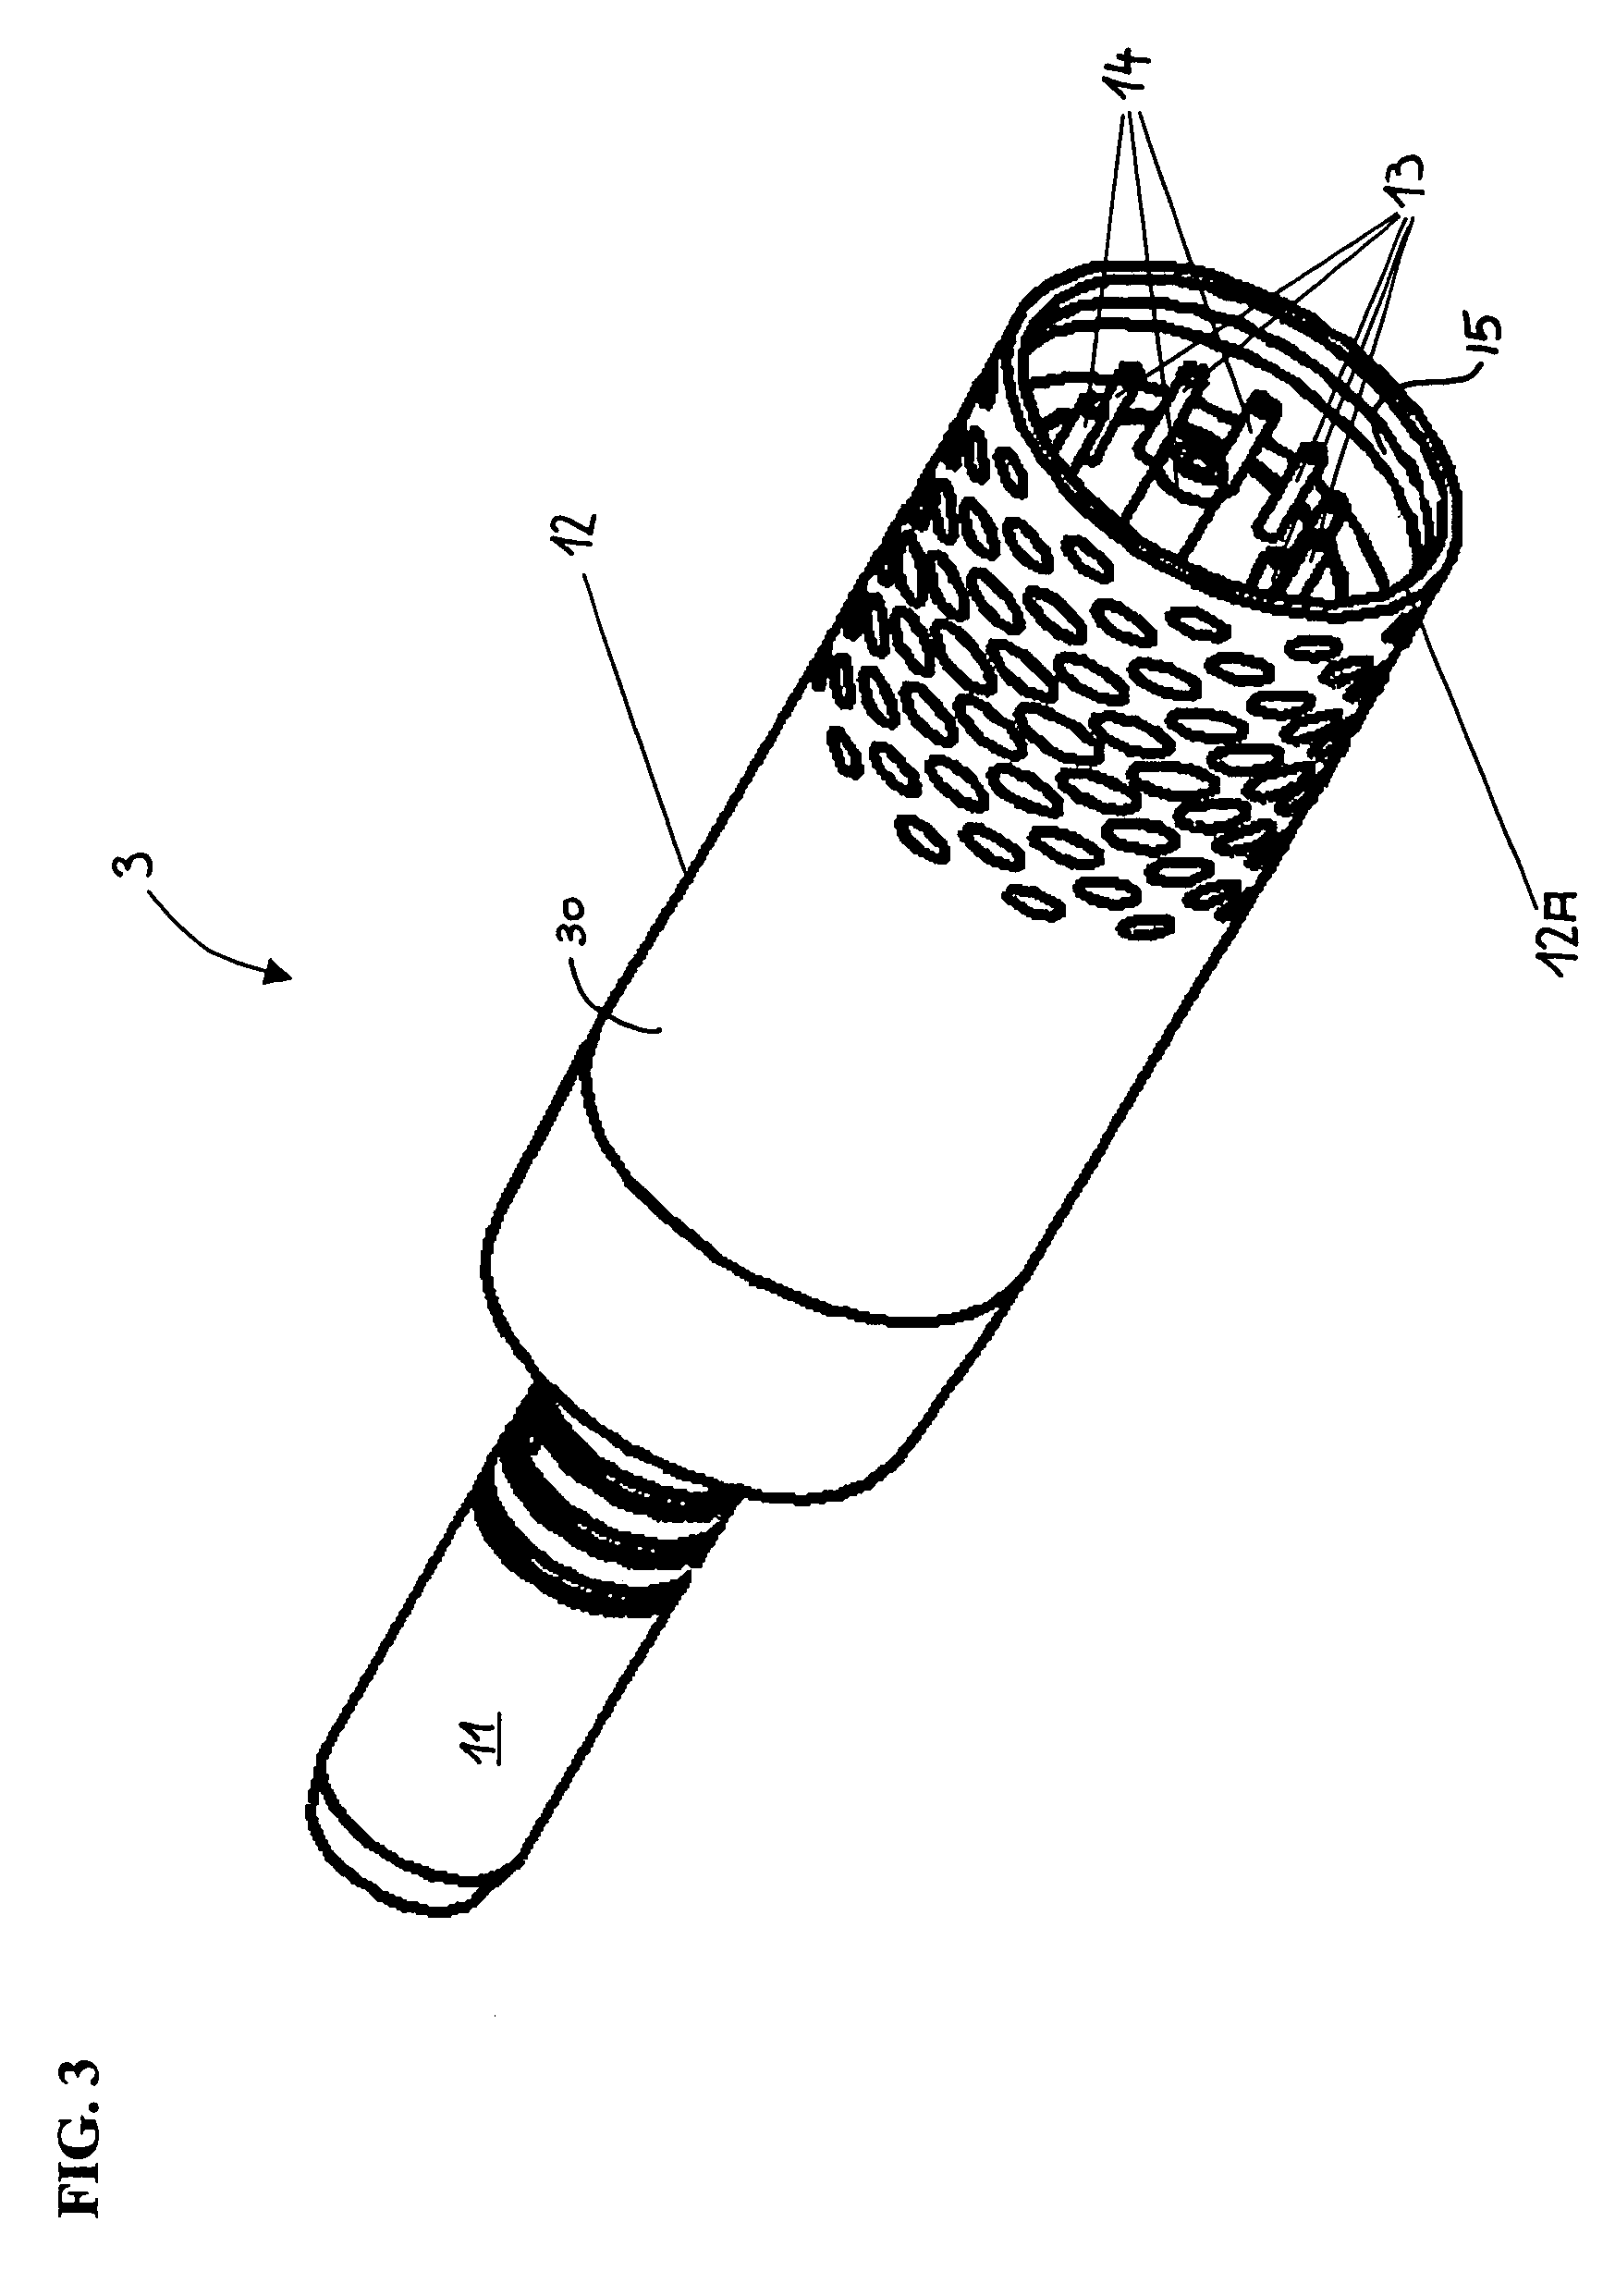 Fast-fit coupling for connecting appliances forming part of a medical or surgical handpiece system to a supply hose